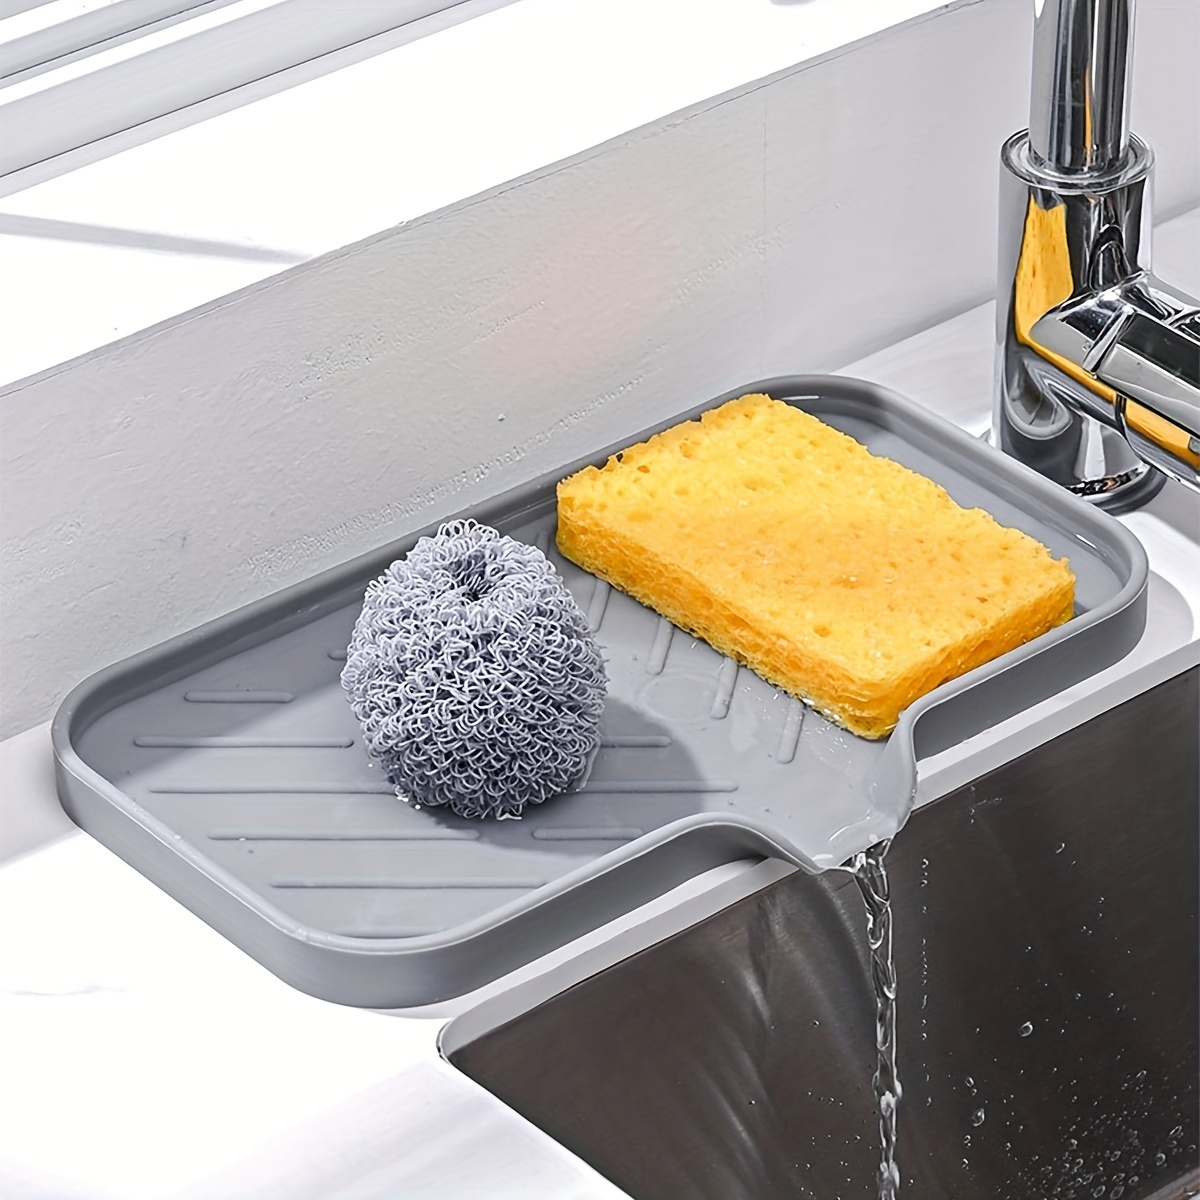 https://img.kwcdn.com/product/large-silicone-sponge-holder/d69d2f15w98k18-2abe20b1/open/2023-09-17/1694942110623-8ac478964ec54de6b1d0da0e6c3f6b18-goods.jpeg?imageView2/2/w/500/q/60/format/webp